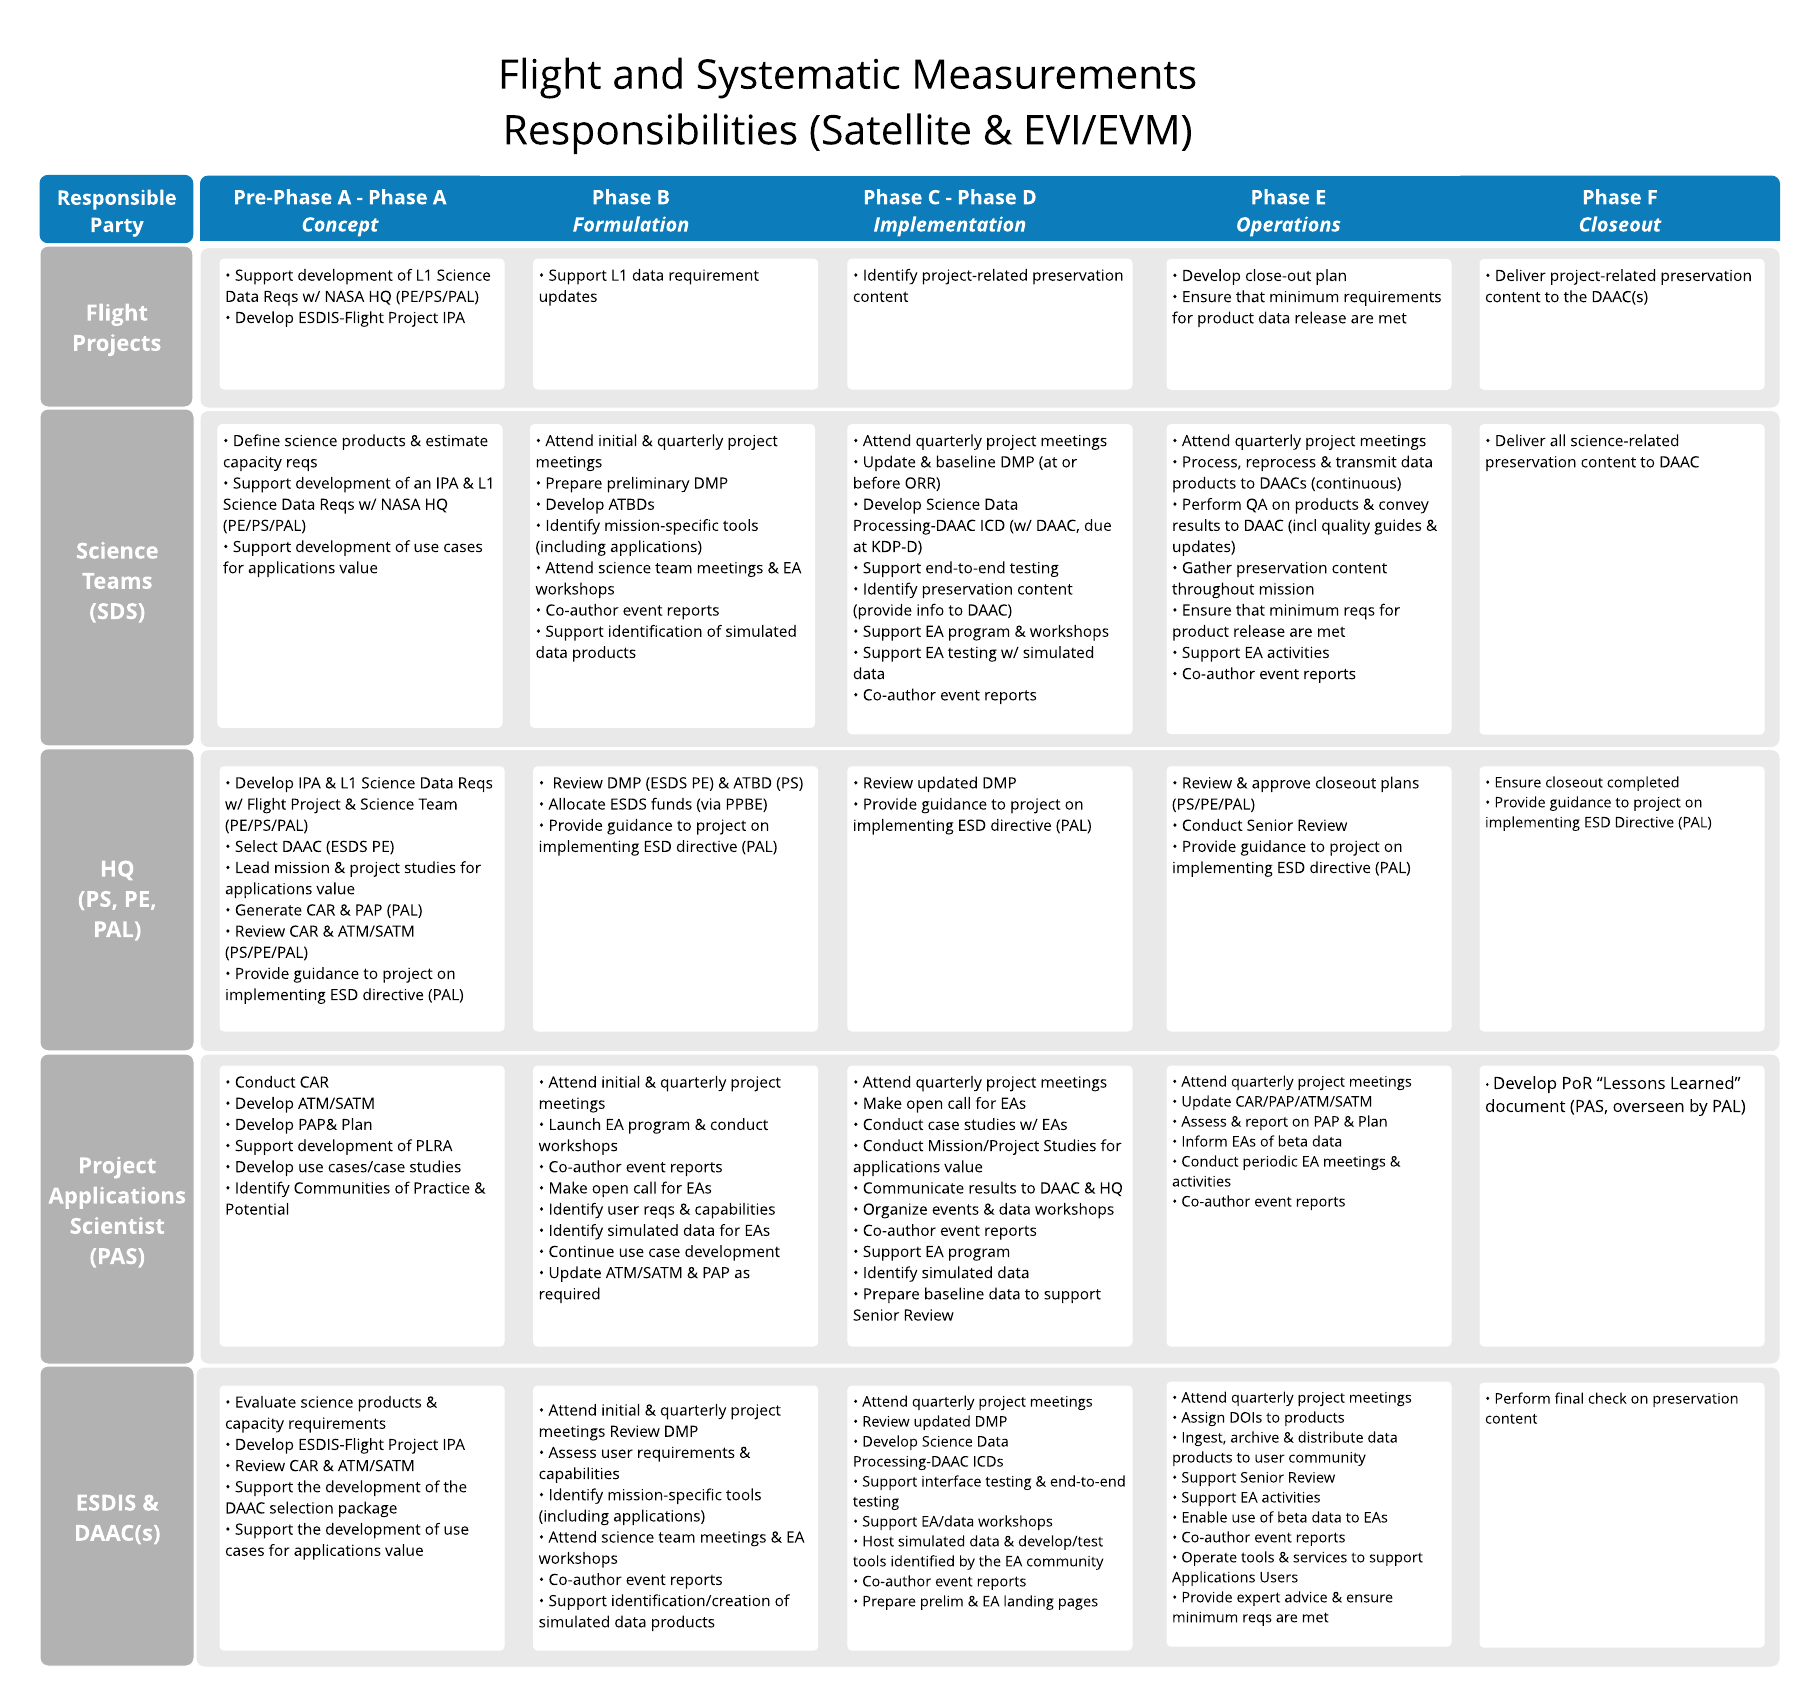 Chart showing data responsibilities for flight and systematic measurements from satellites and EVI/EVM.